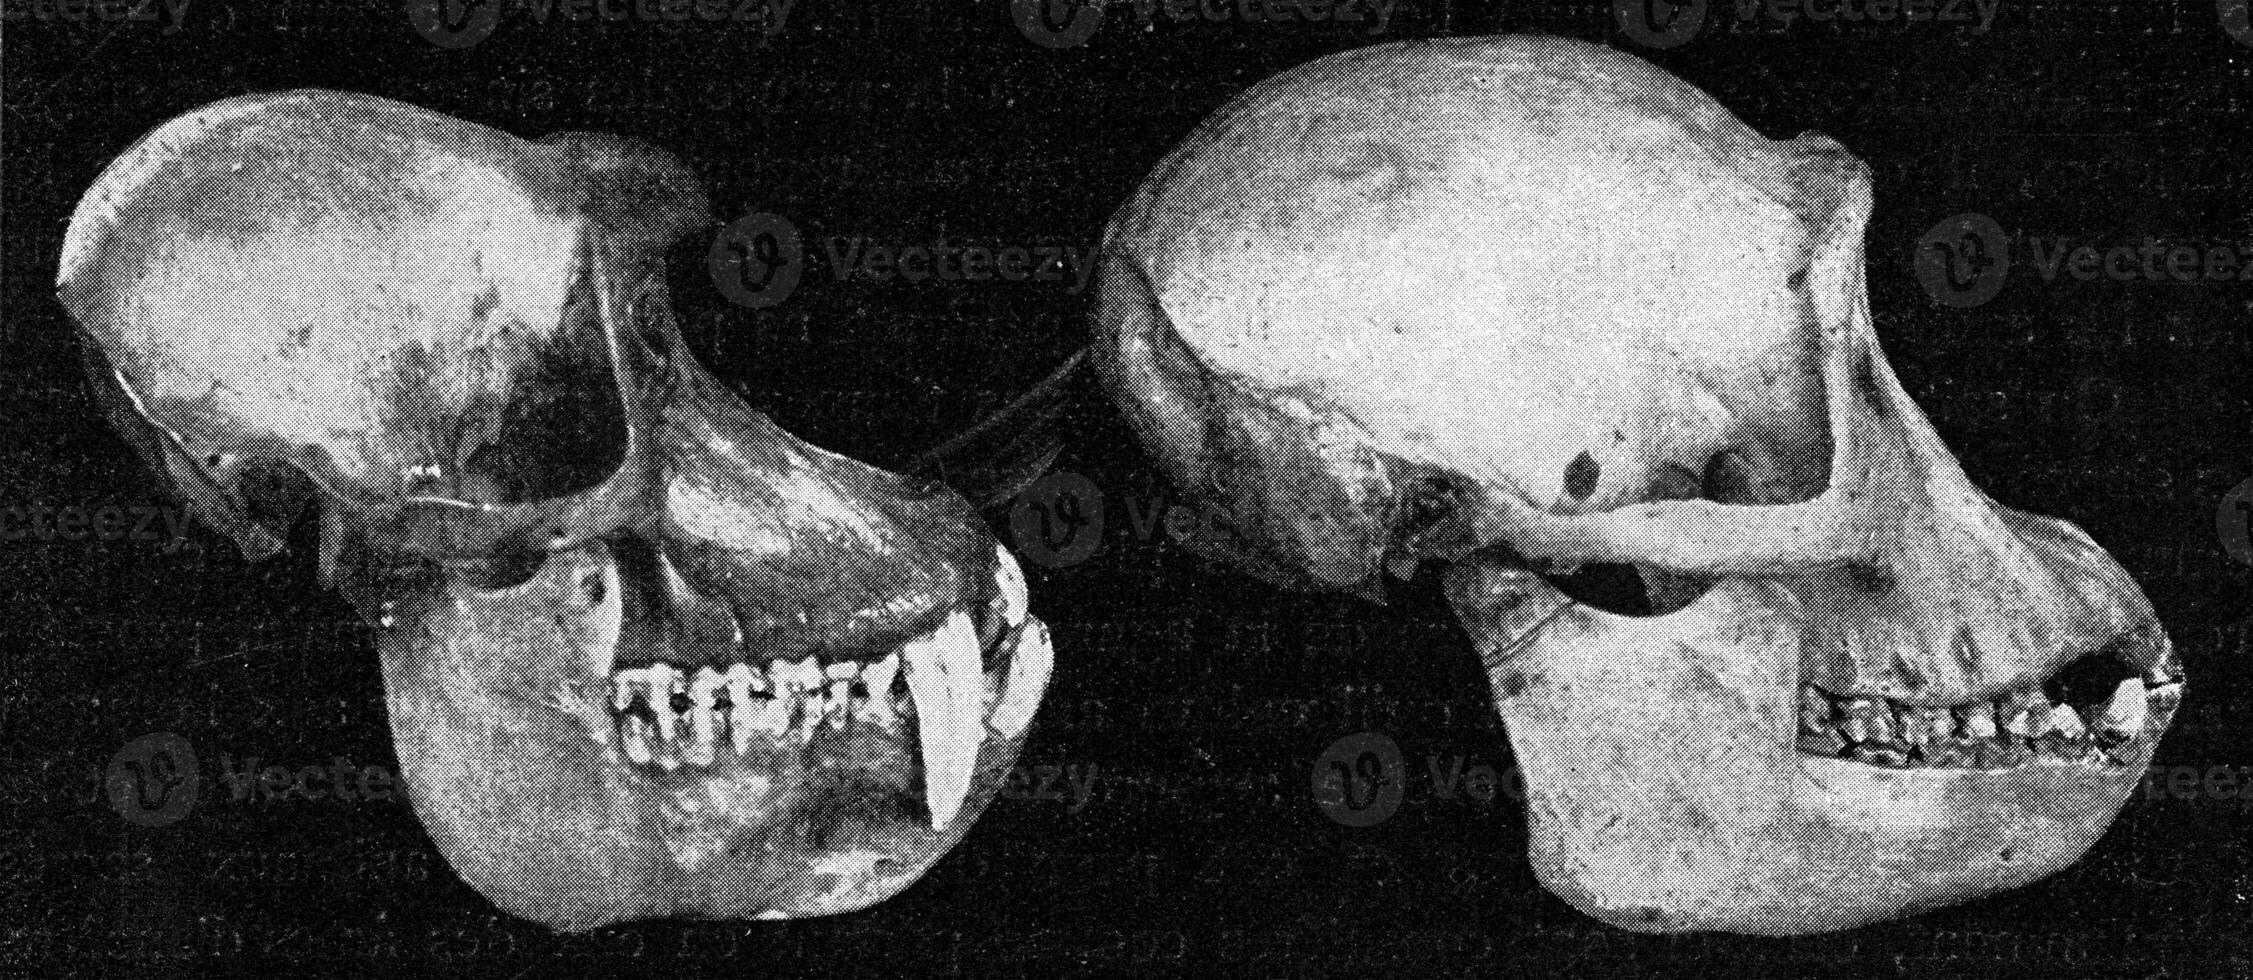 Skulls of papion and a chimpanzee, vintage engraving. photo